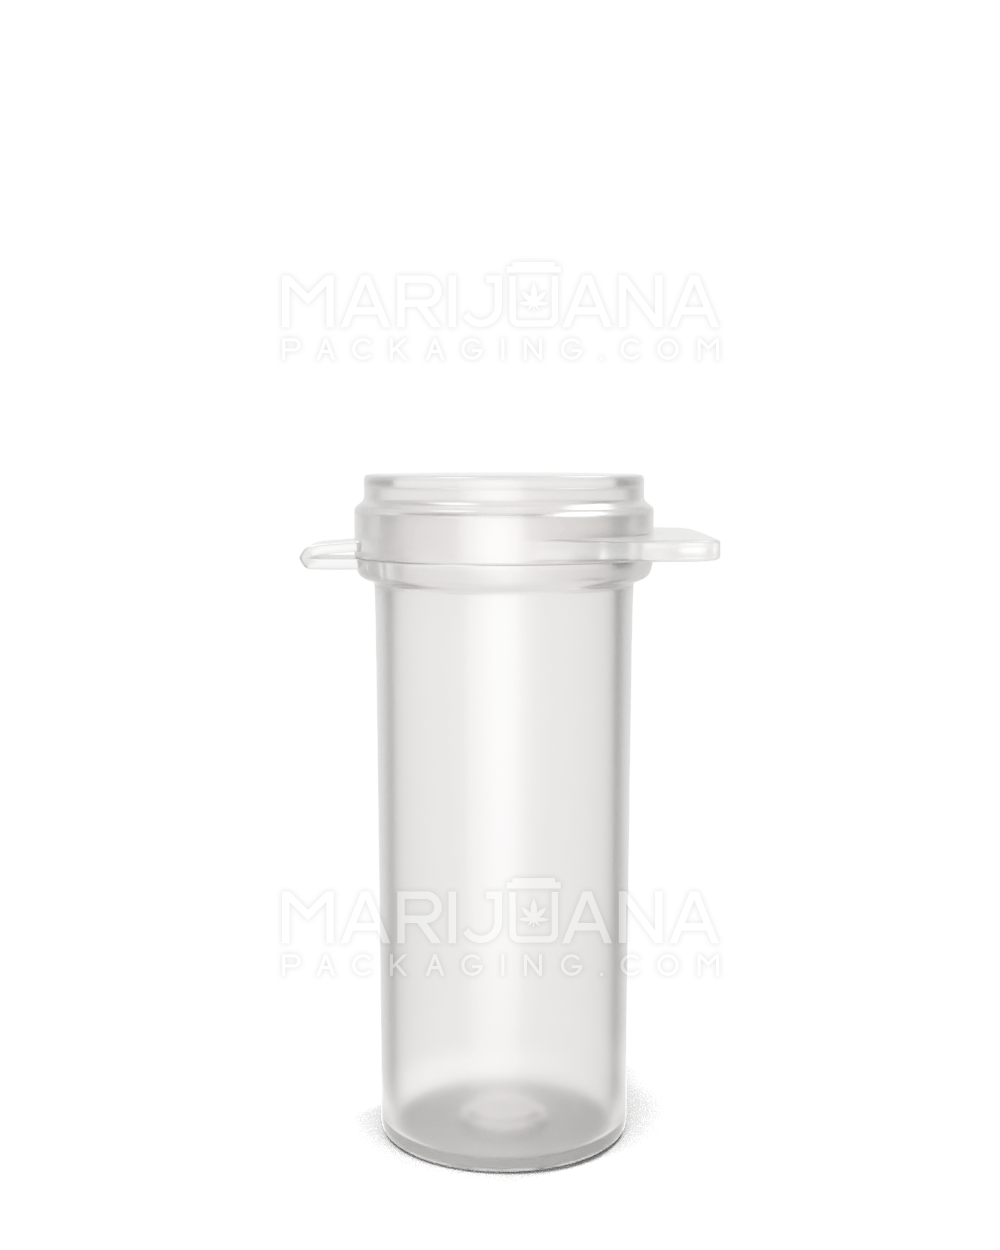 Hinged Lid Pop Top Plastic Seed Container Vial | 9 Dram - Clear - 600 Count - 2